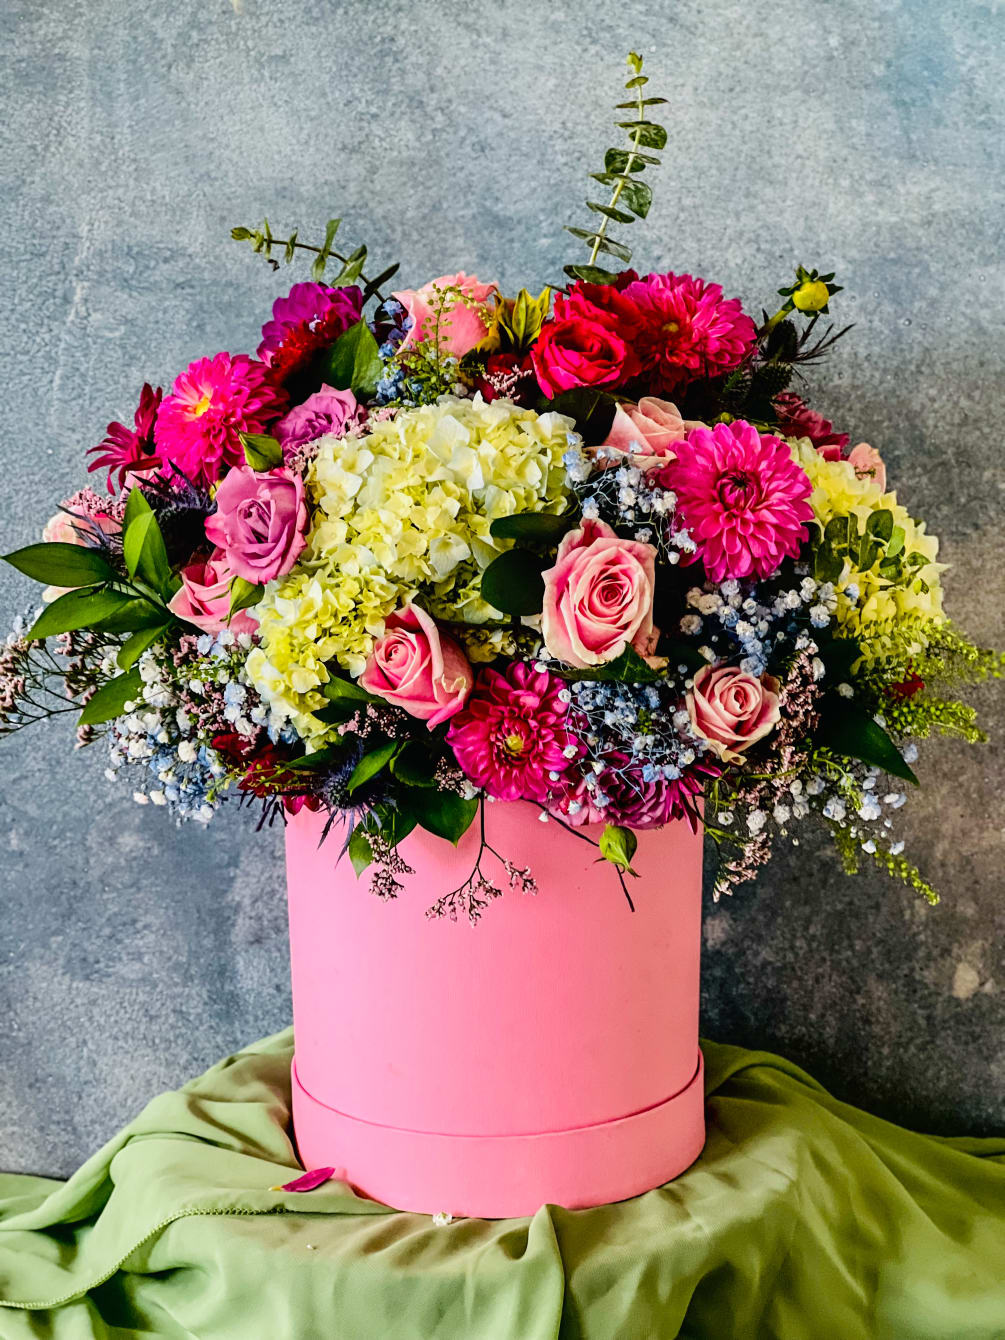 Brighten her Day! Pretty Pink and White Blooms designed in a large